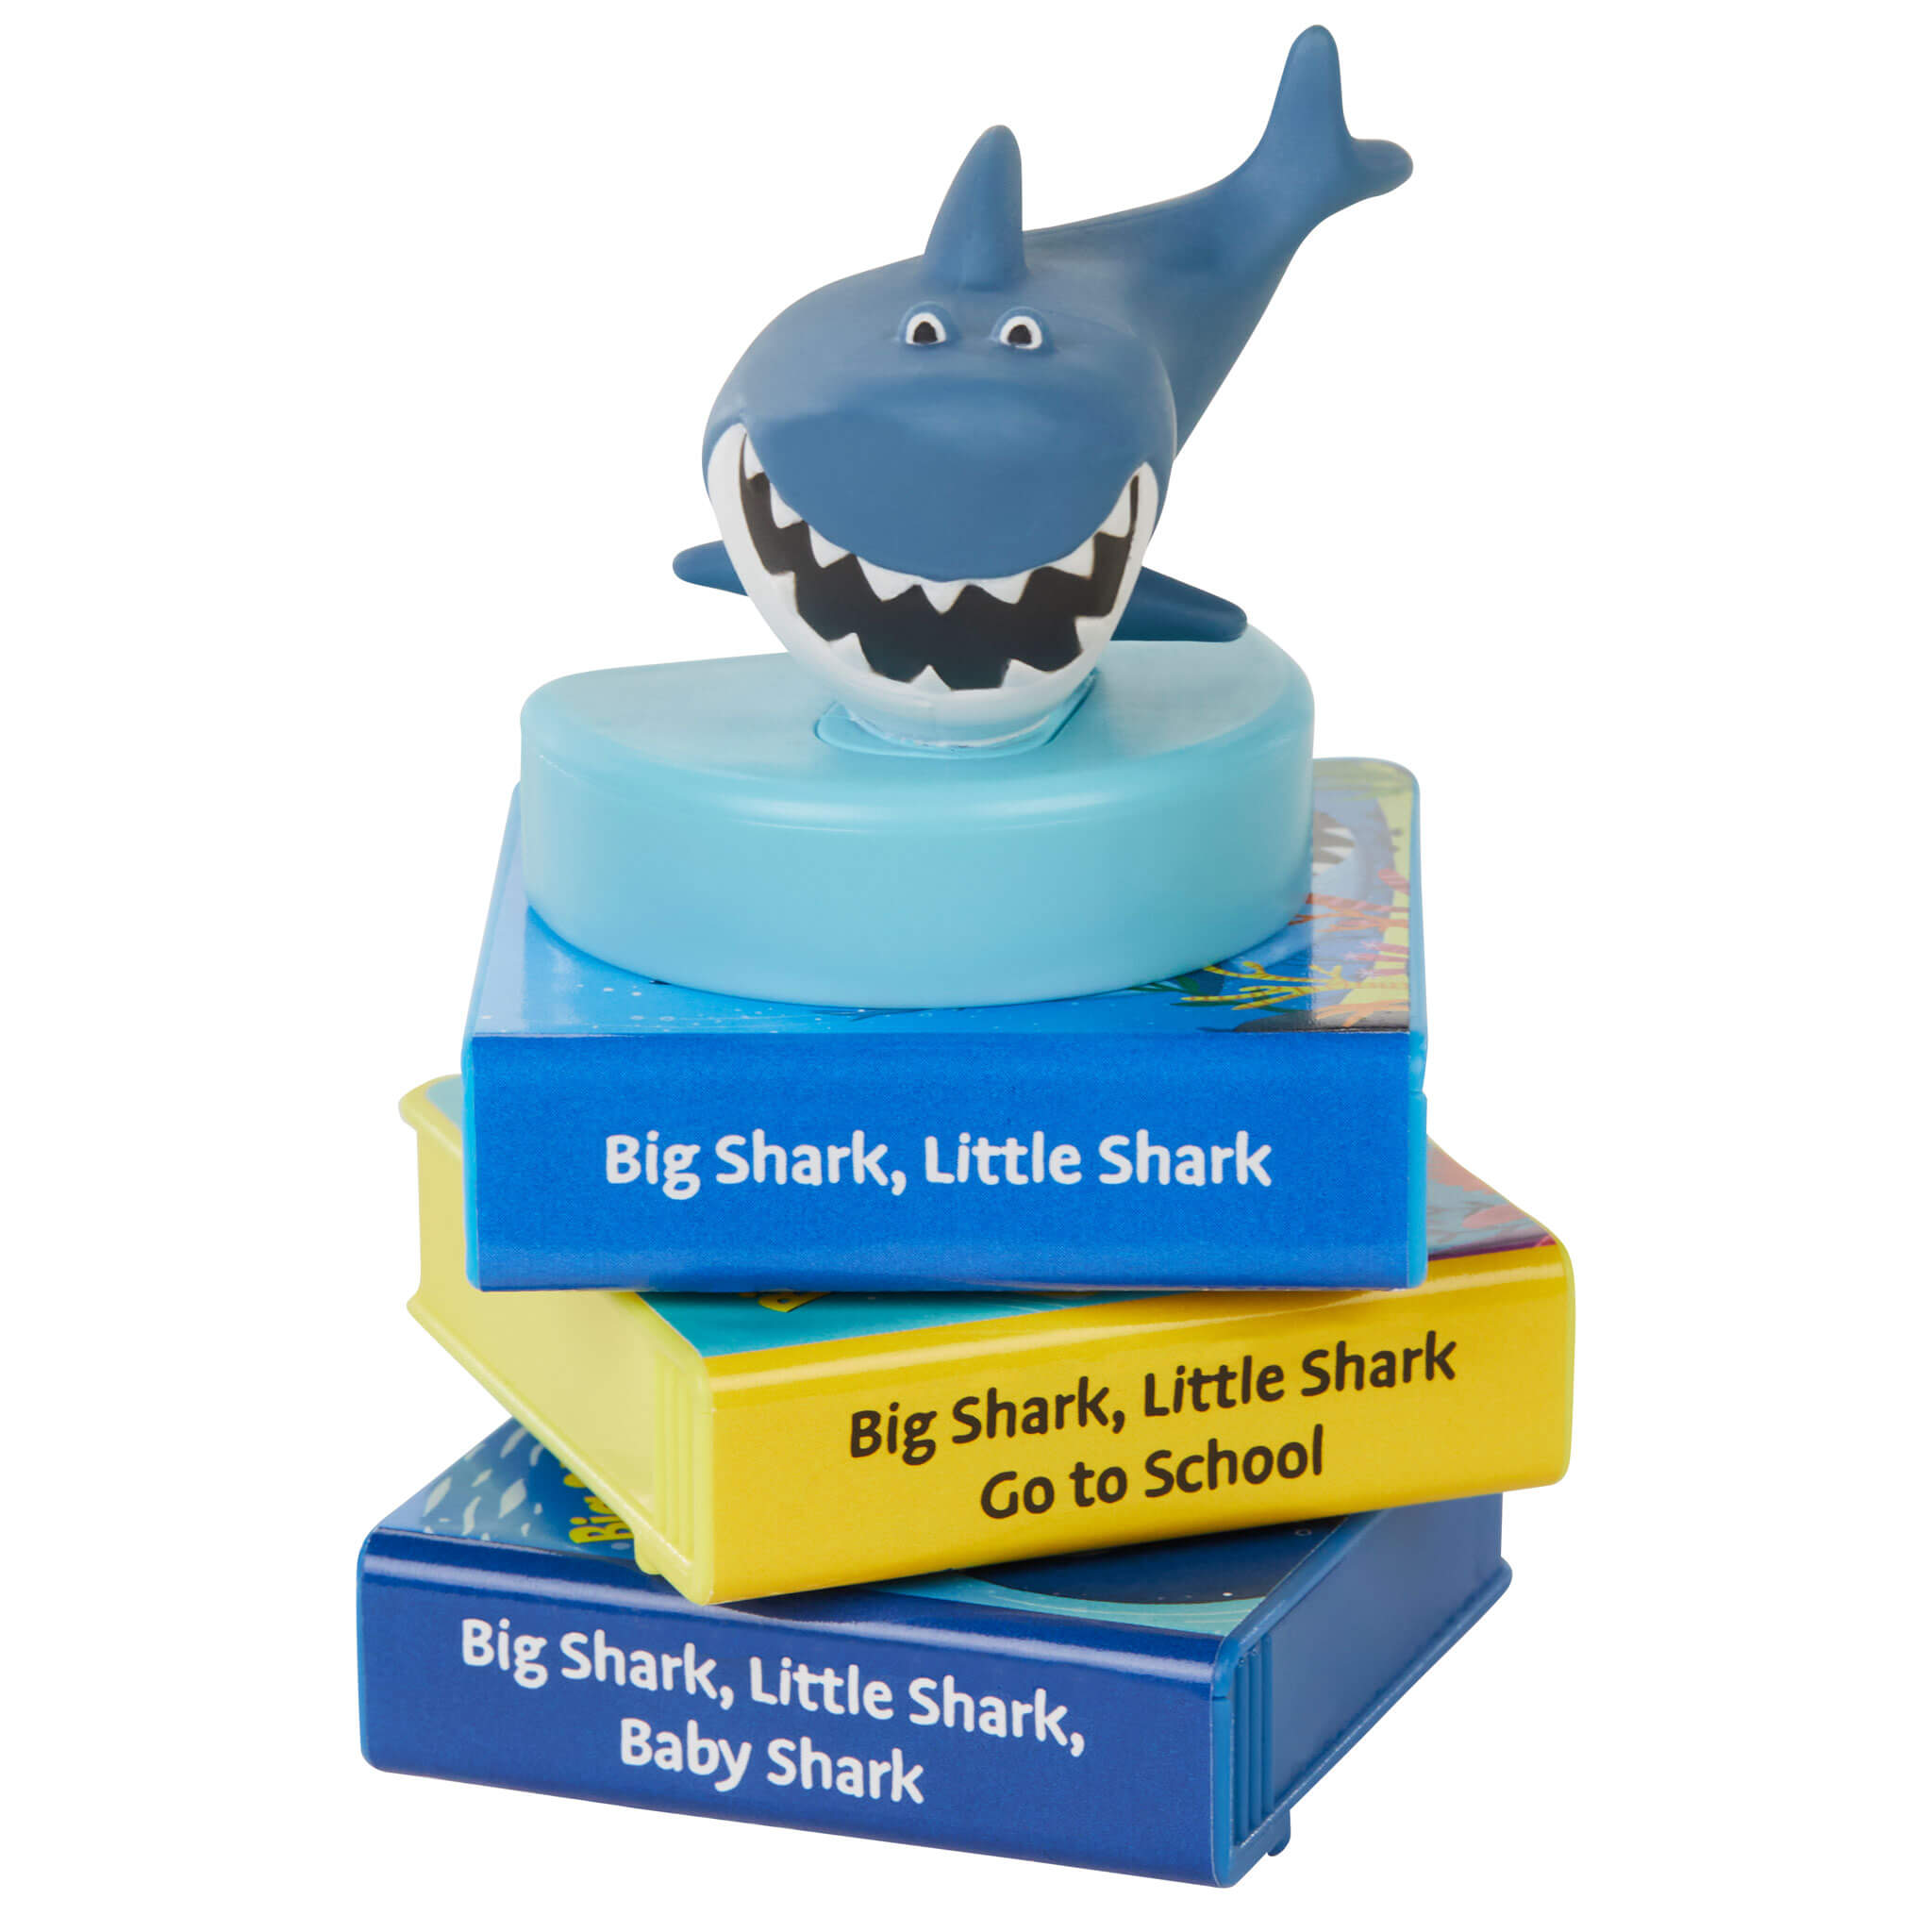 Baby shark Toy Coffee Maker With Light And Sound My Home Blue